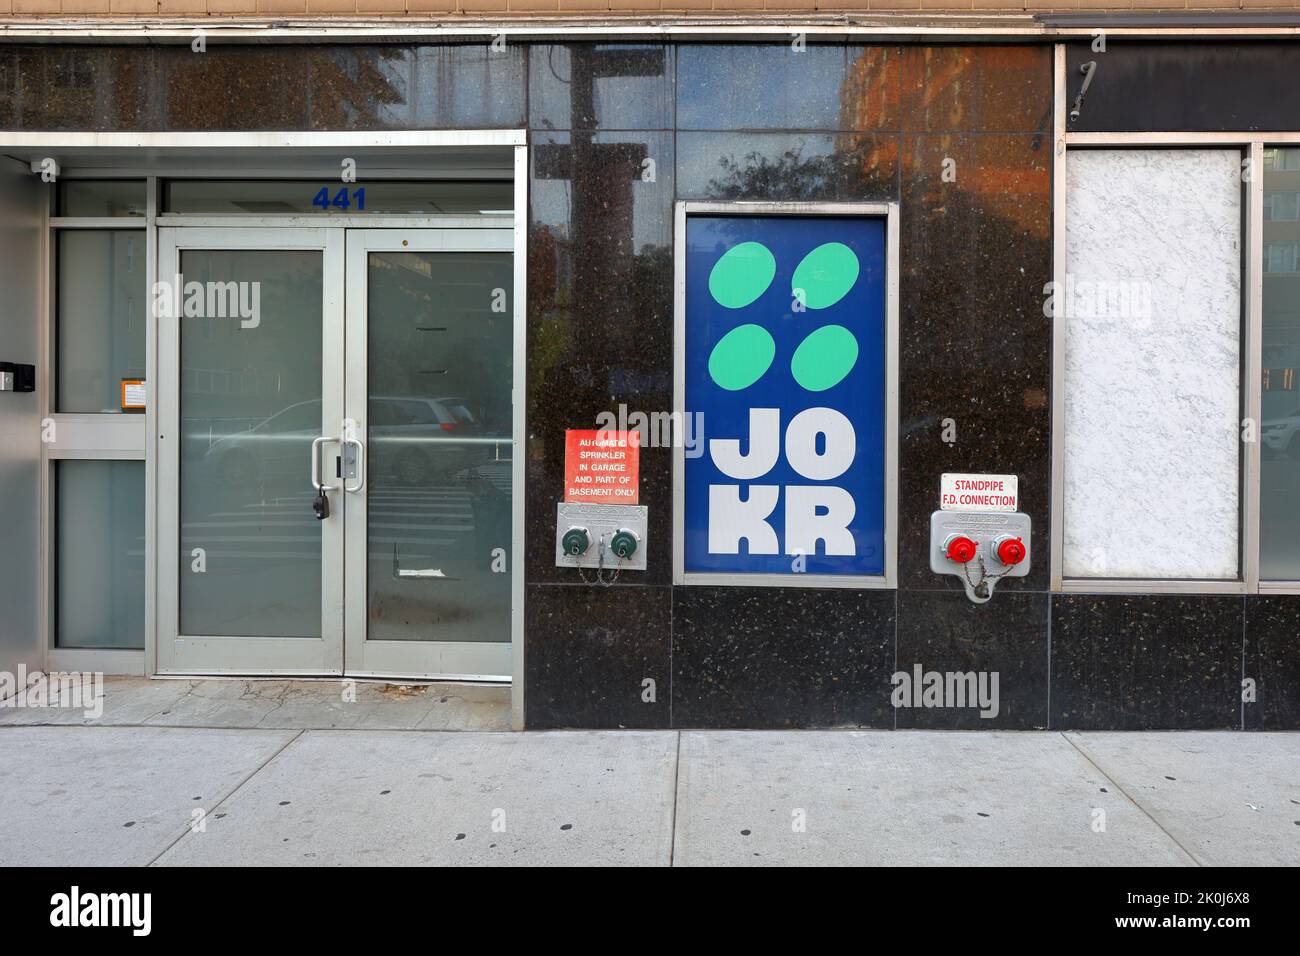 A closed, out of business, Jokr rapid online ordering warehouse 'dark store' Manhattan, New York. Jokr has ceased business in the US. Stock Photo